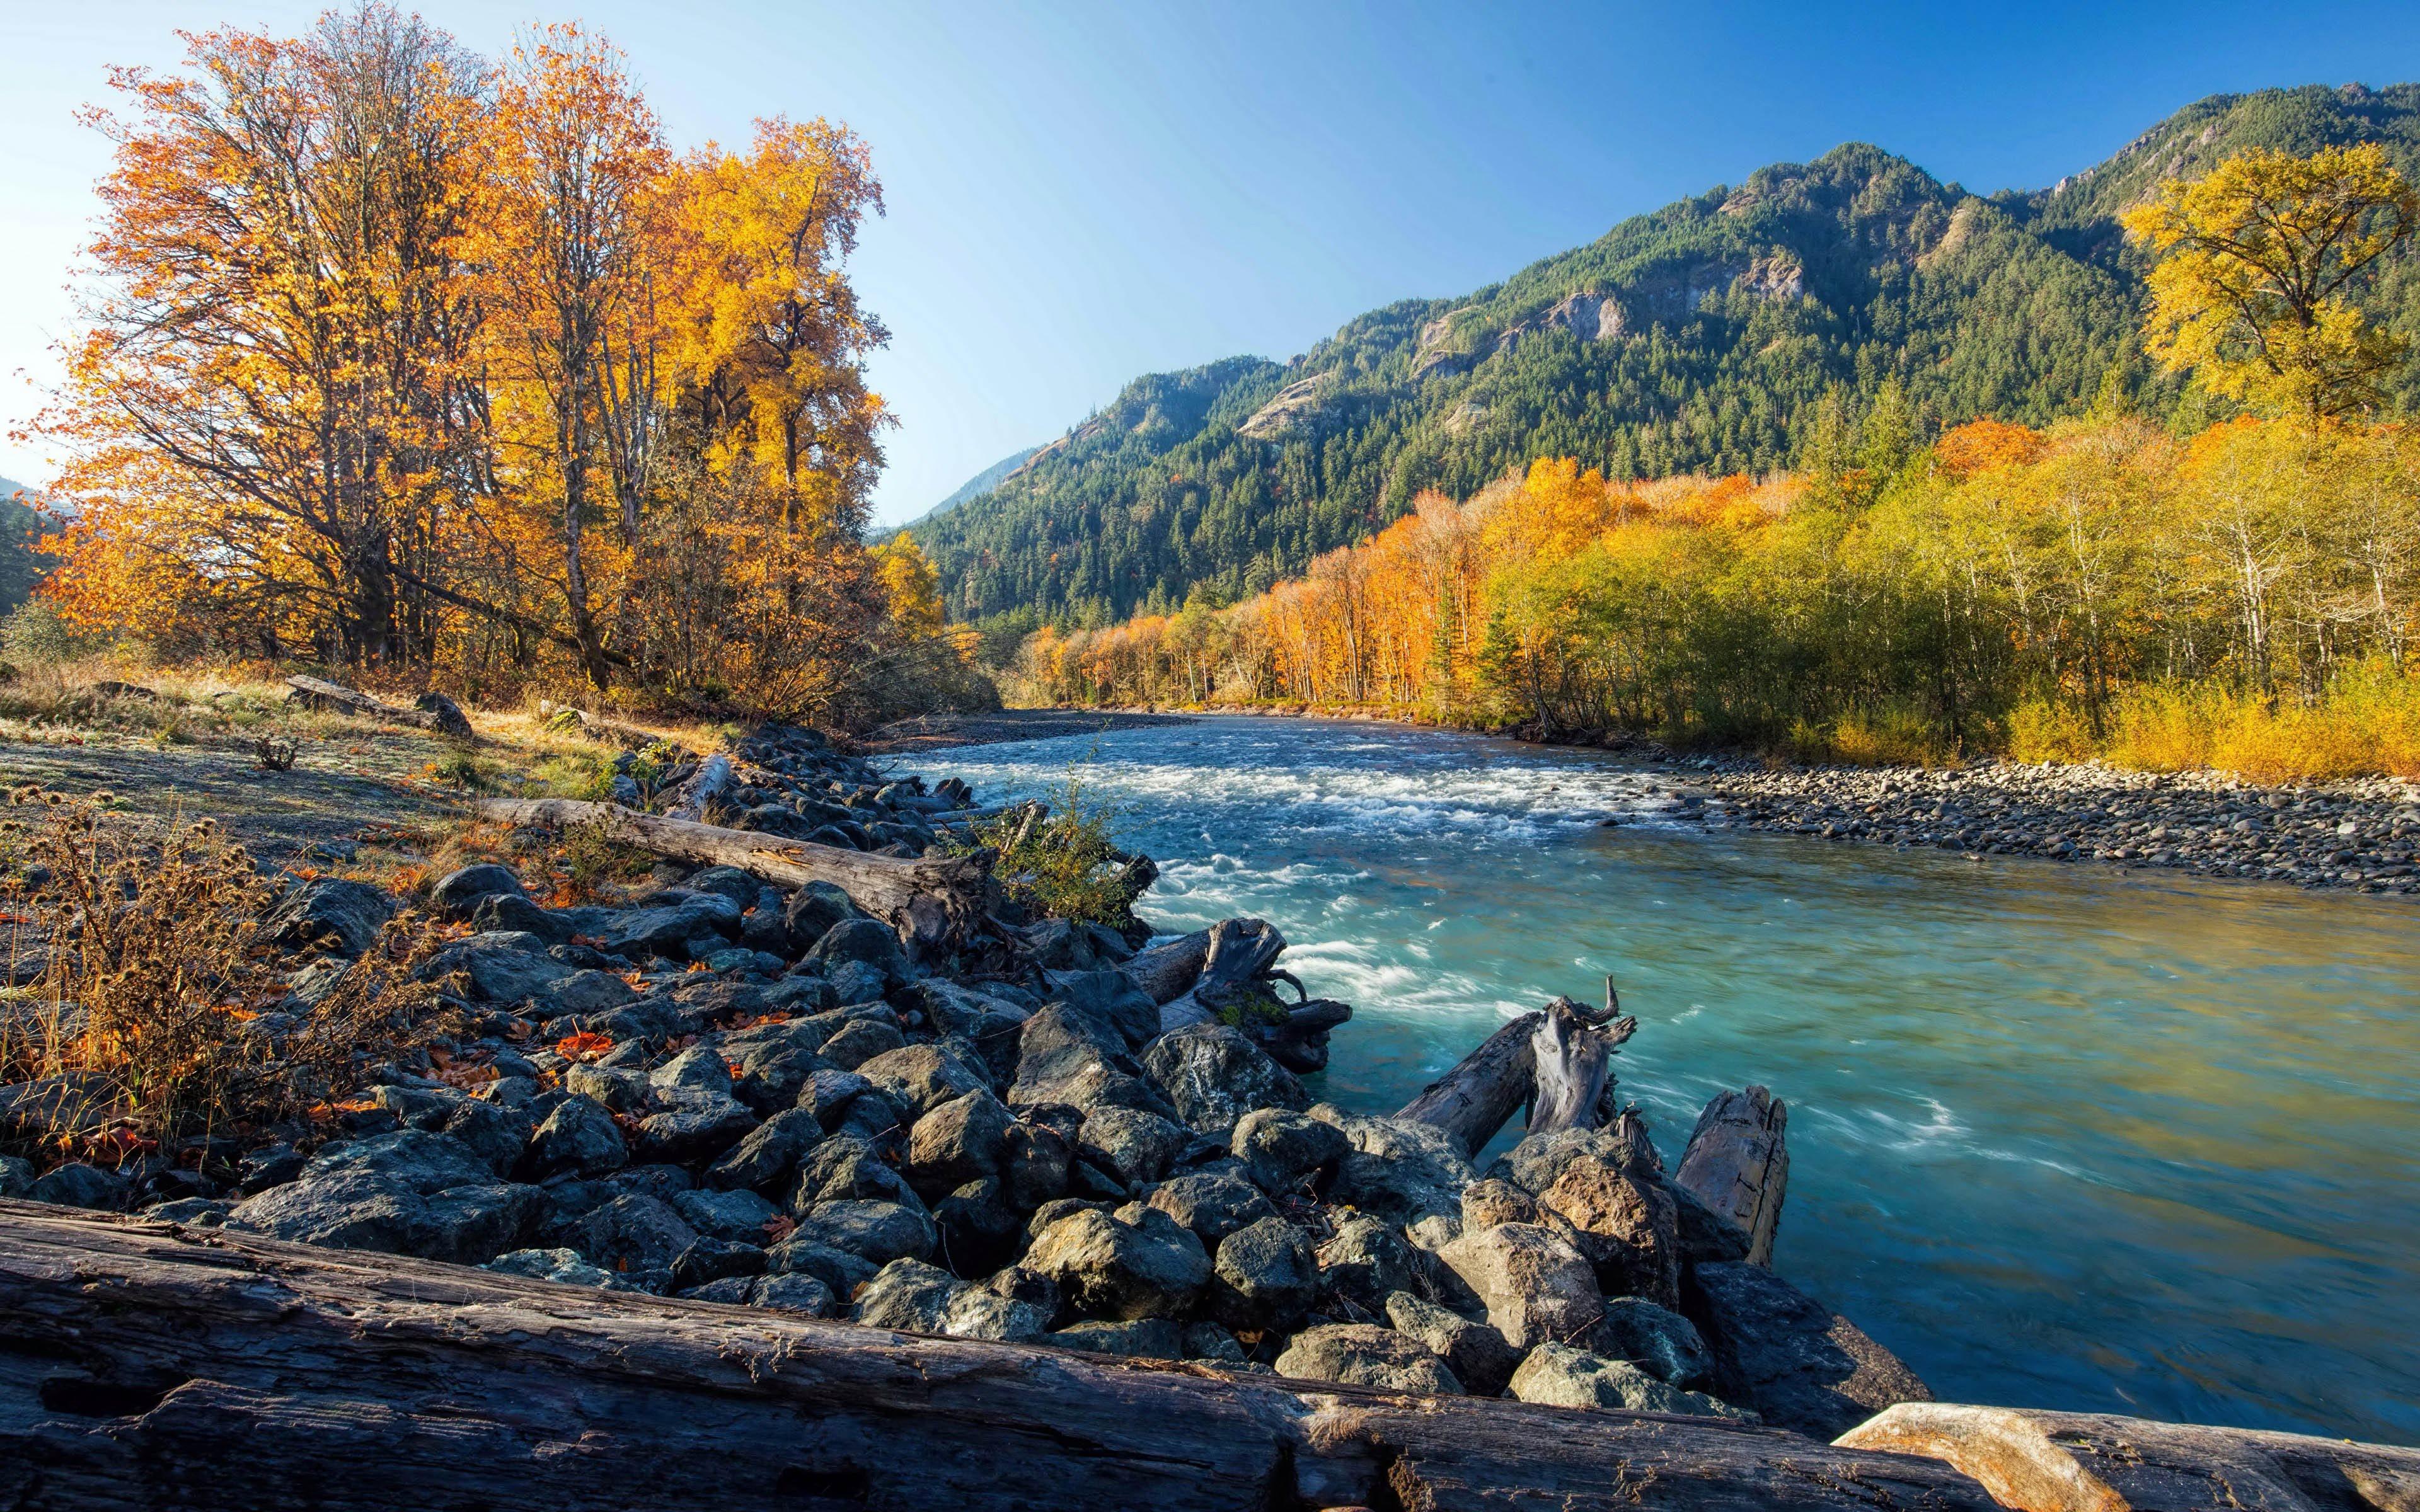 Download wallpaper America, 4k, autumn, river, forest, mountains